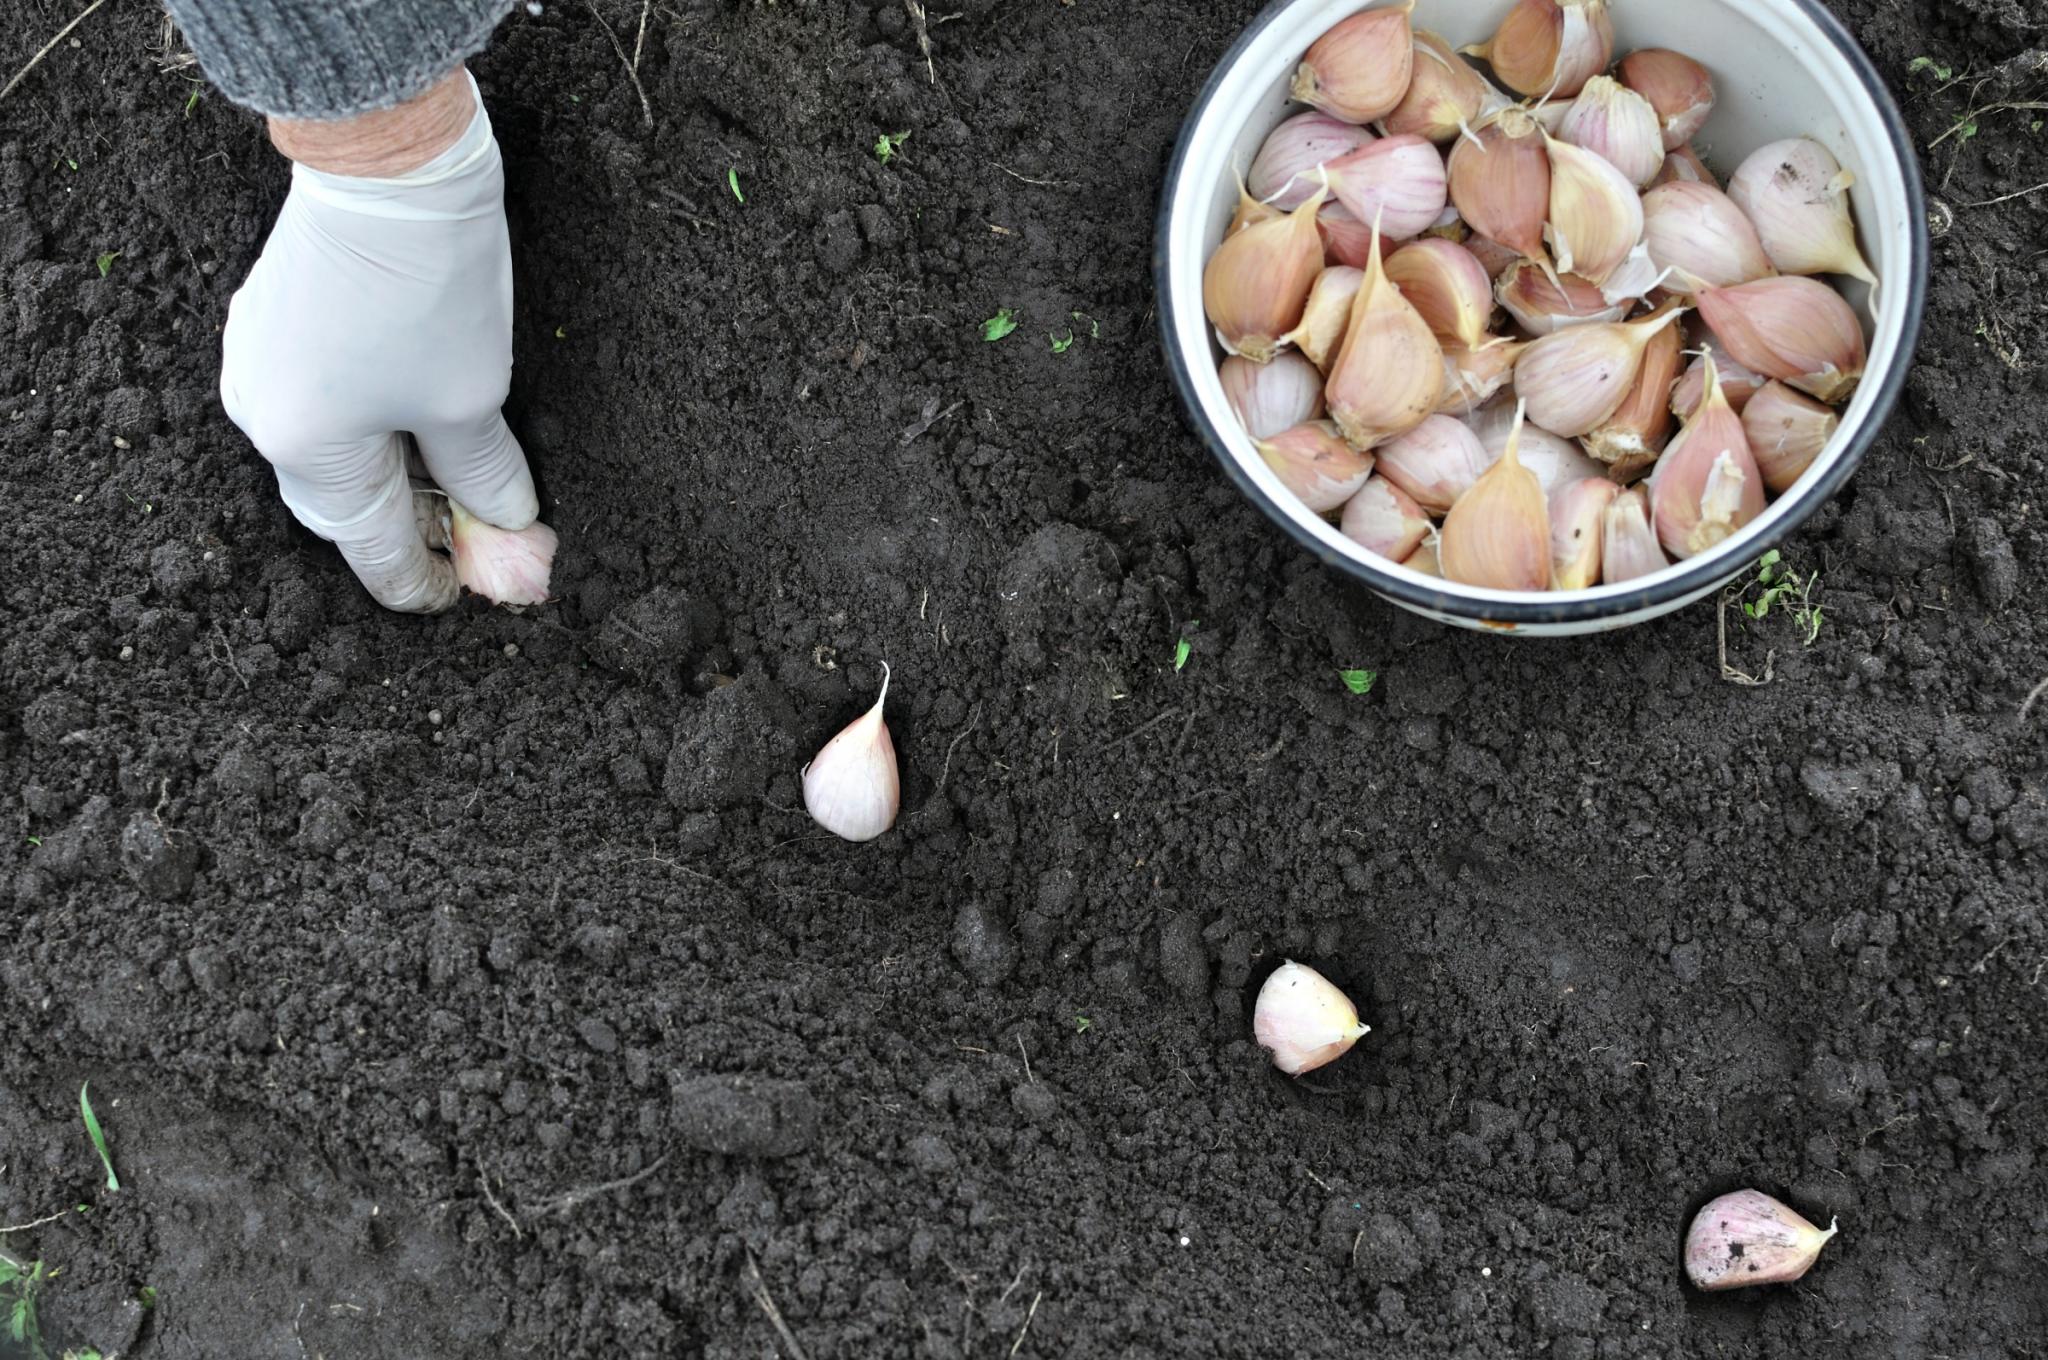 Planting garlic cloves in dirt with rubber gloved hands. Photo by Yuriy S / Getty Images